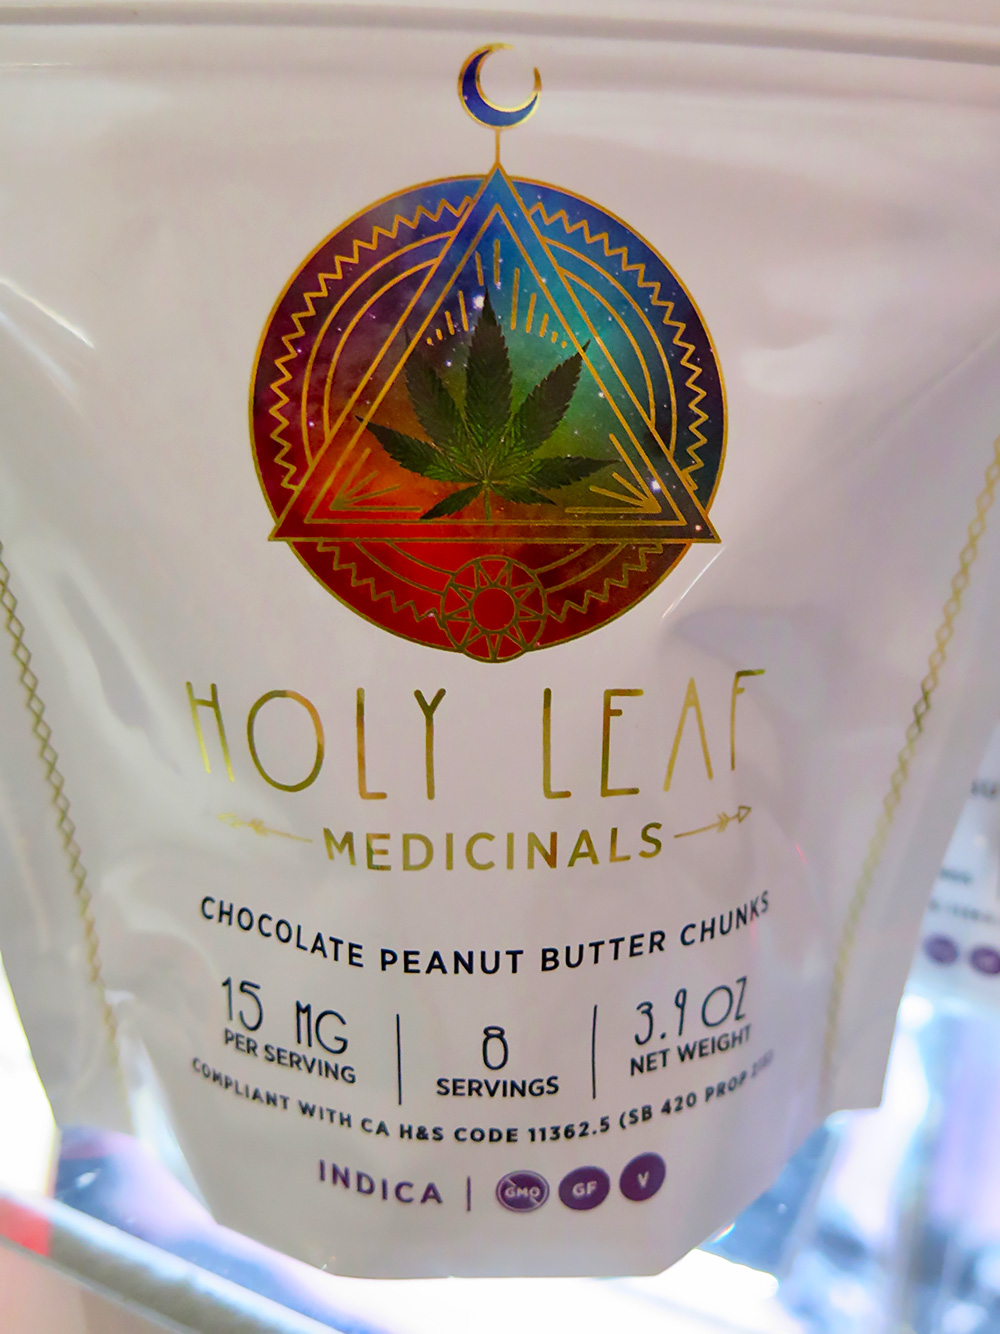 Holy Leaf Medicinals chocolate peanut butter Bliss Chunks